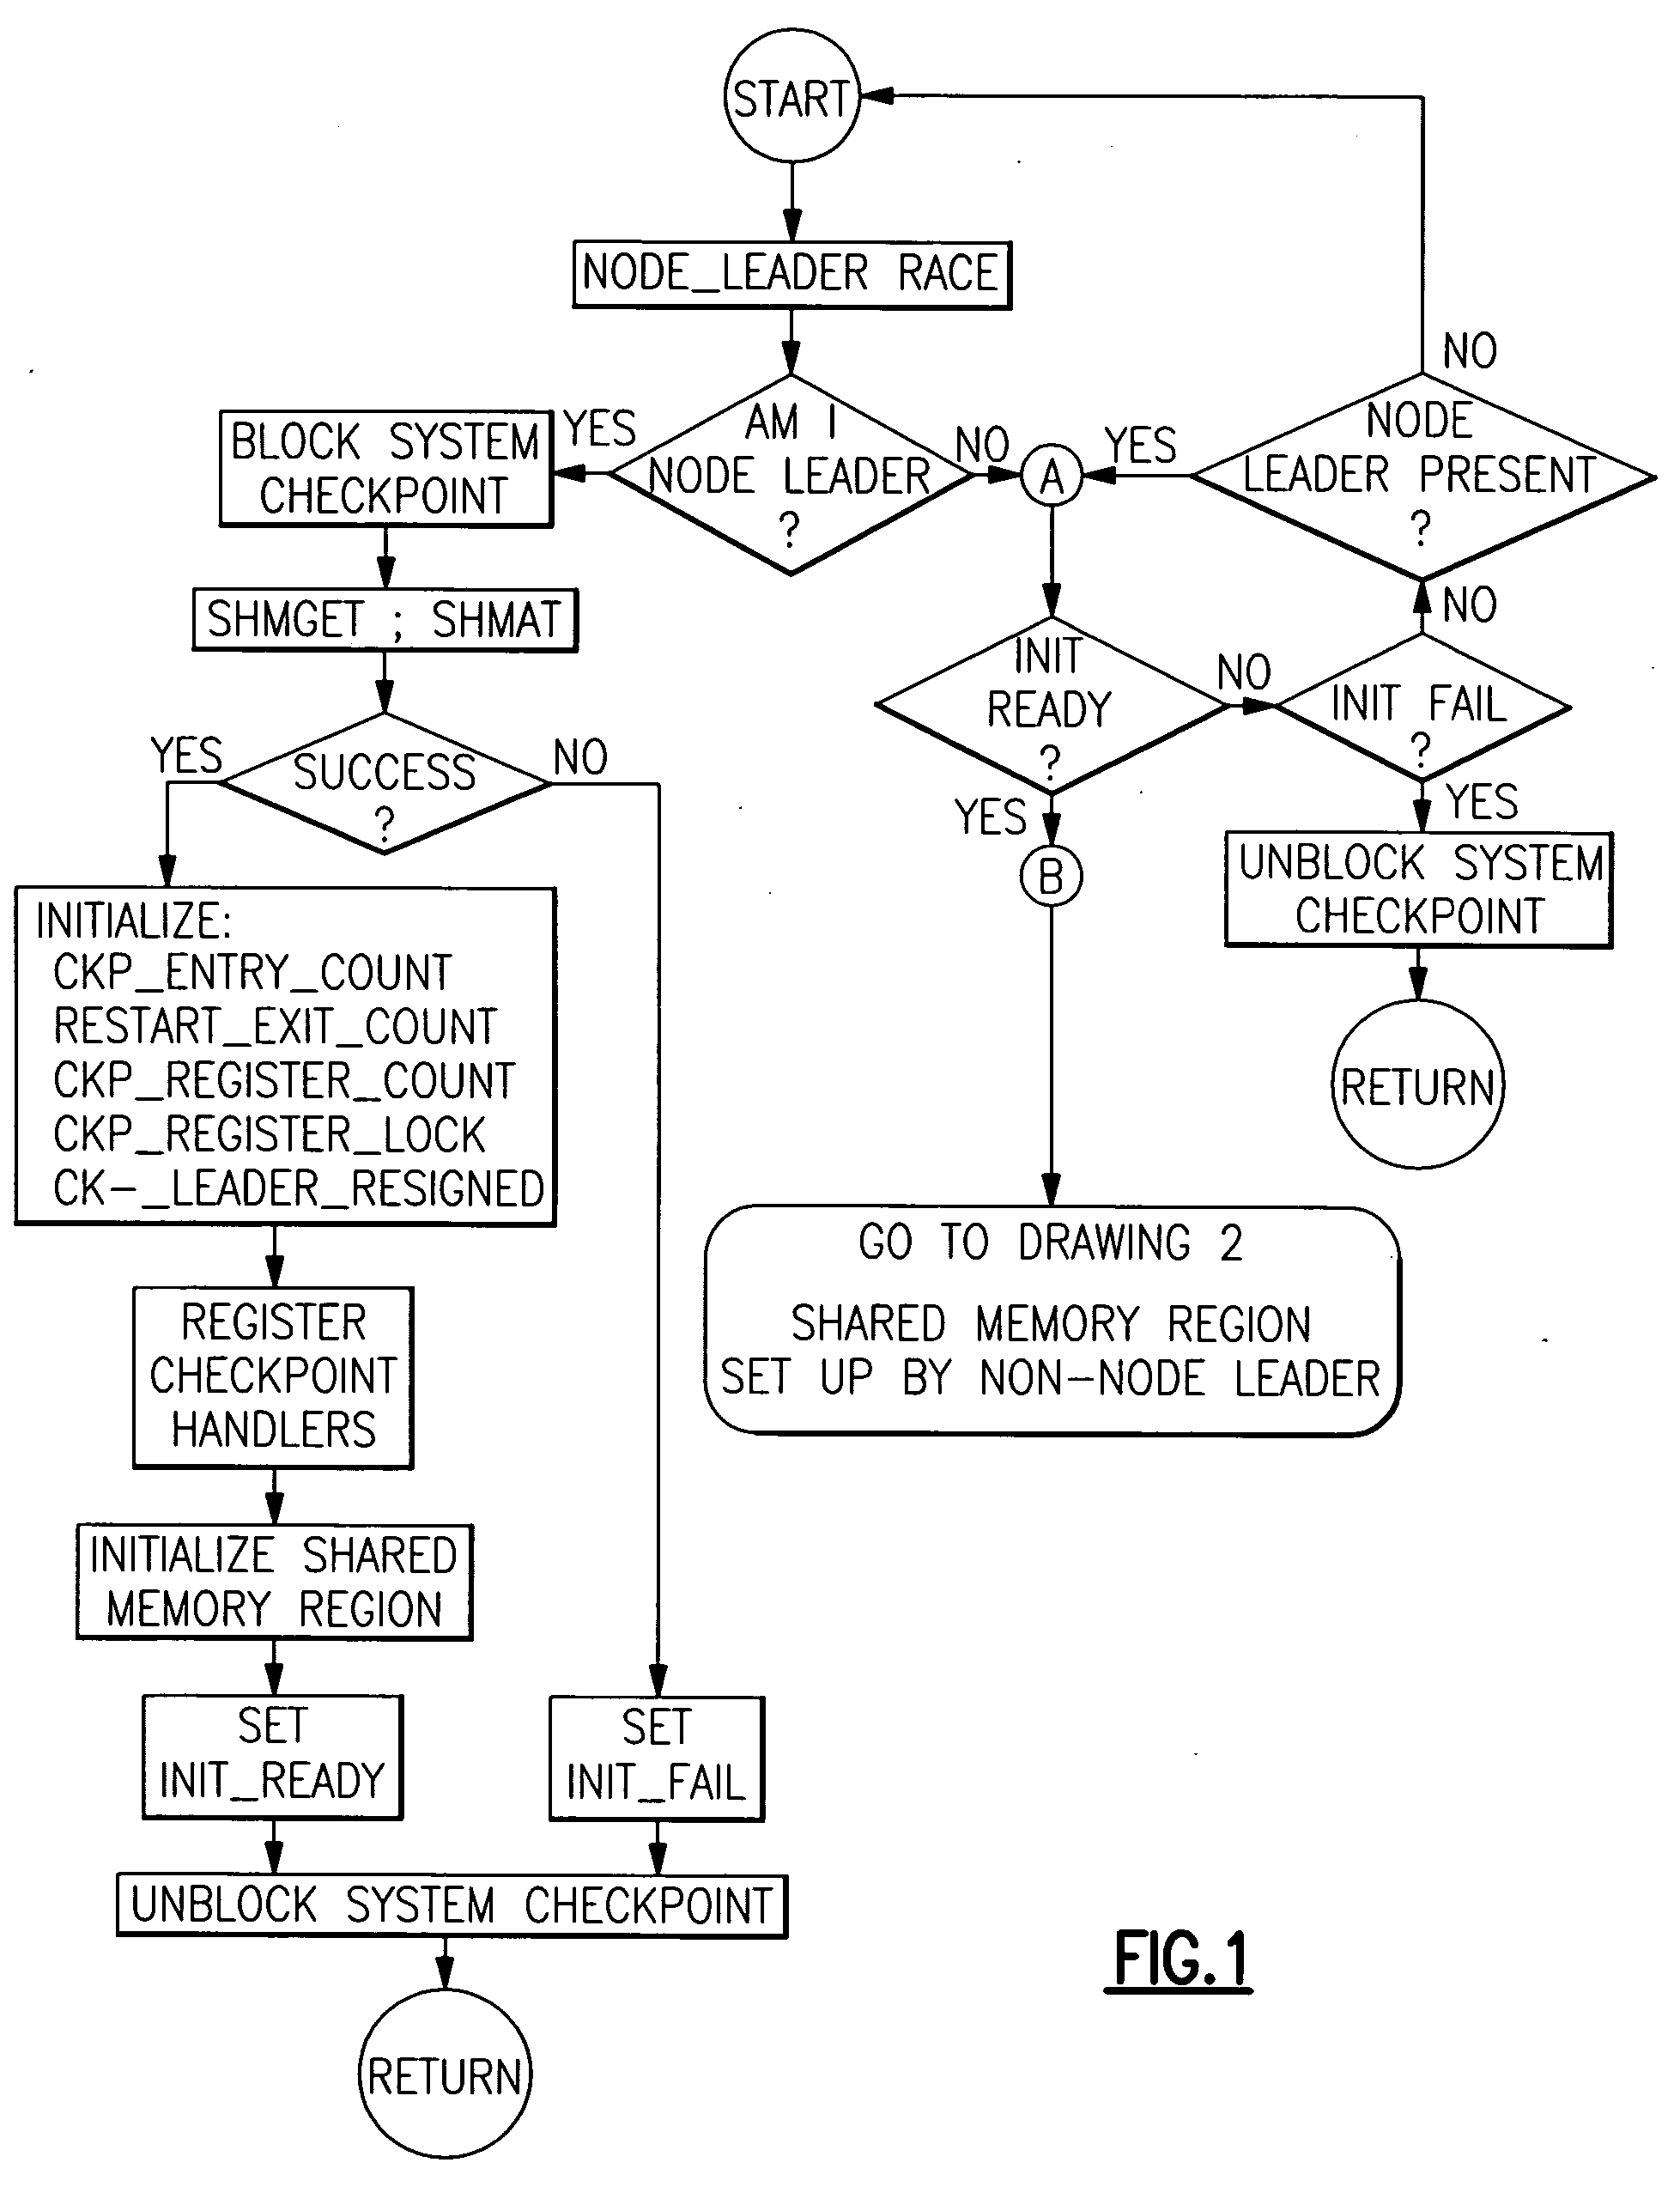 Checkpoint/resume/restart safe methods in a data processing system to establish, to restore and to release shared memory regions